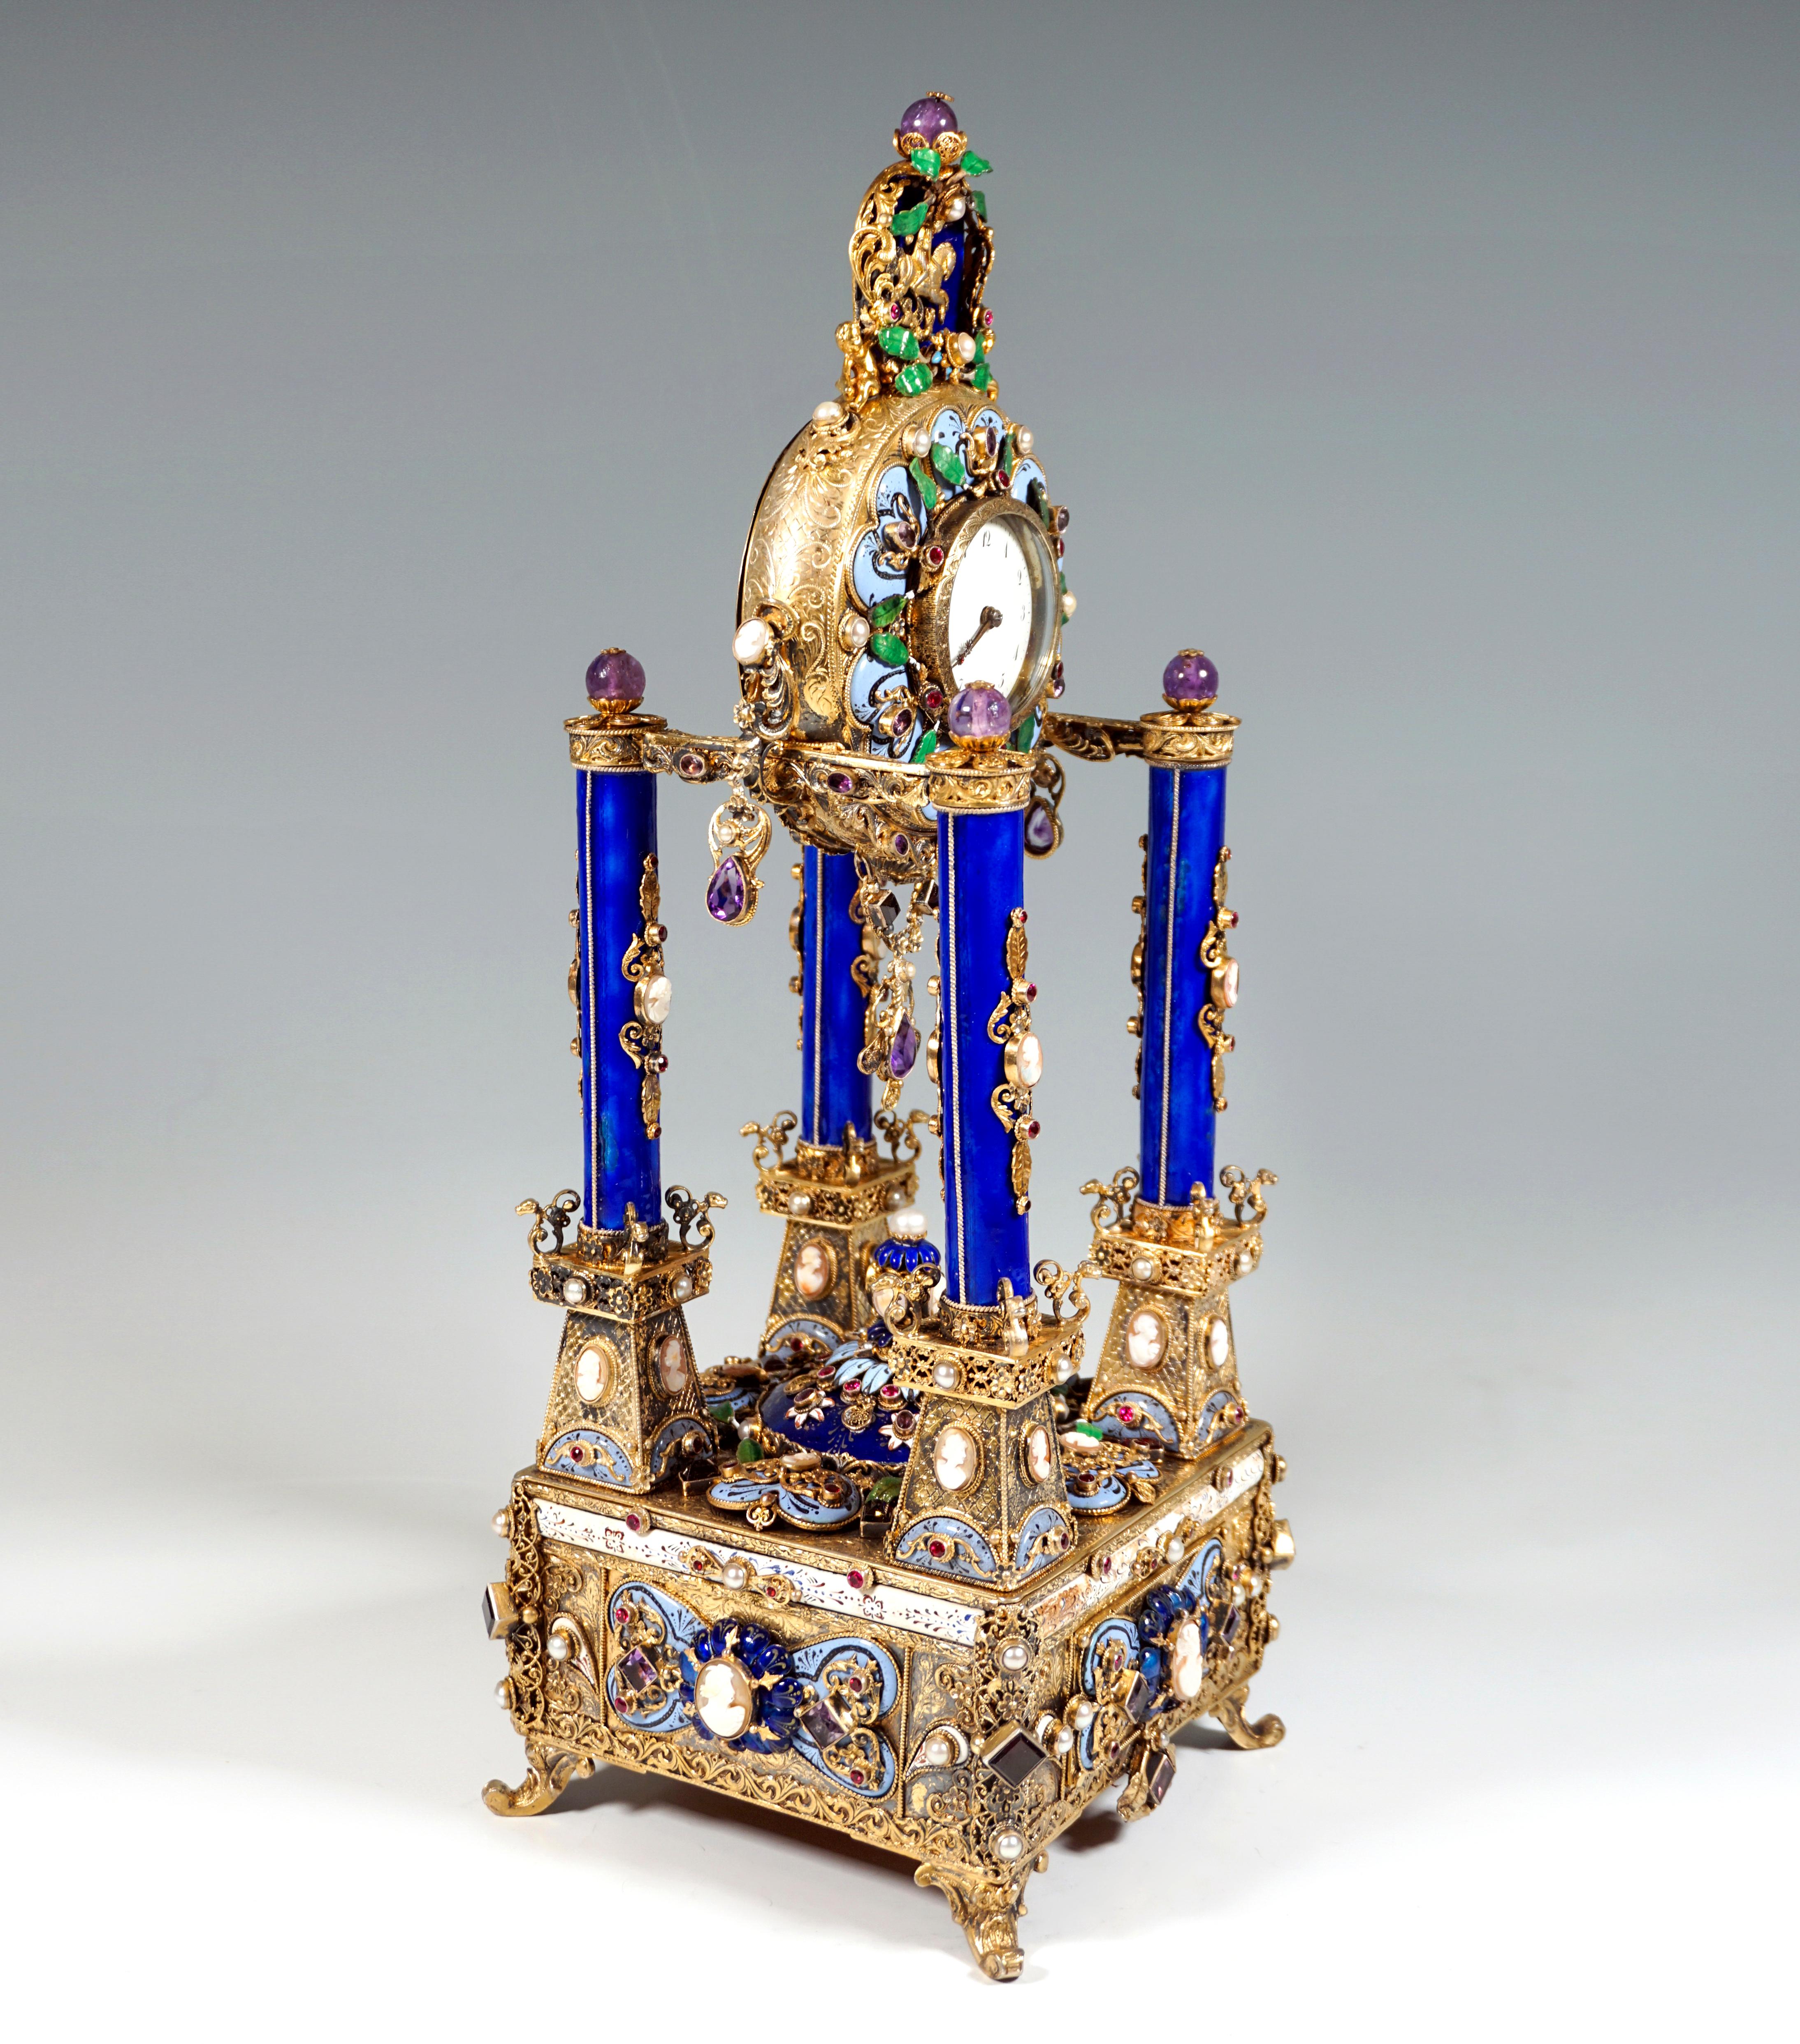 Artfully decorated silver gilded table clock by a Viennese master: 
The base body made of silver, containing the musical mechanism, standing on four volute feet over a square plan, gilded surface chased and densely covered with reliefed and fully